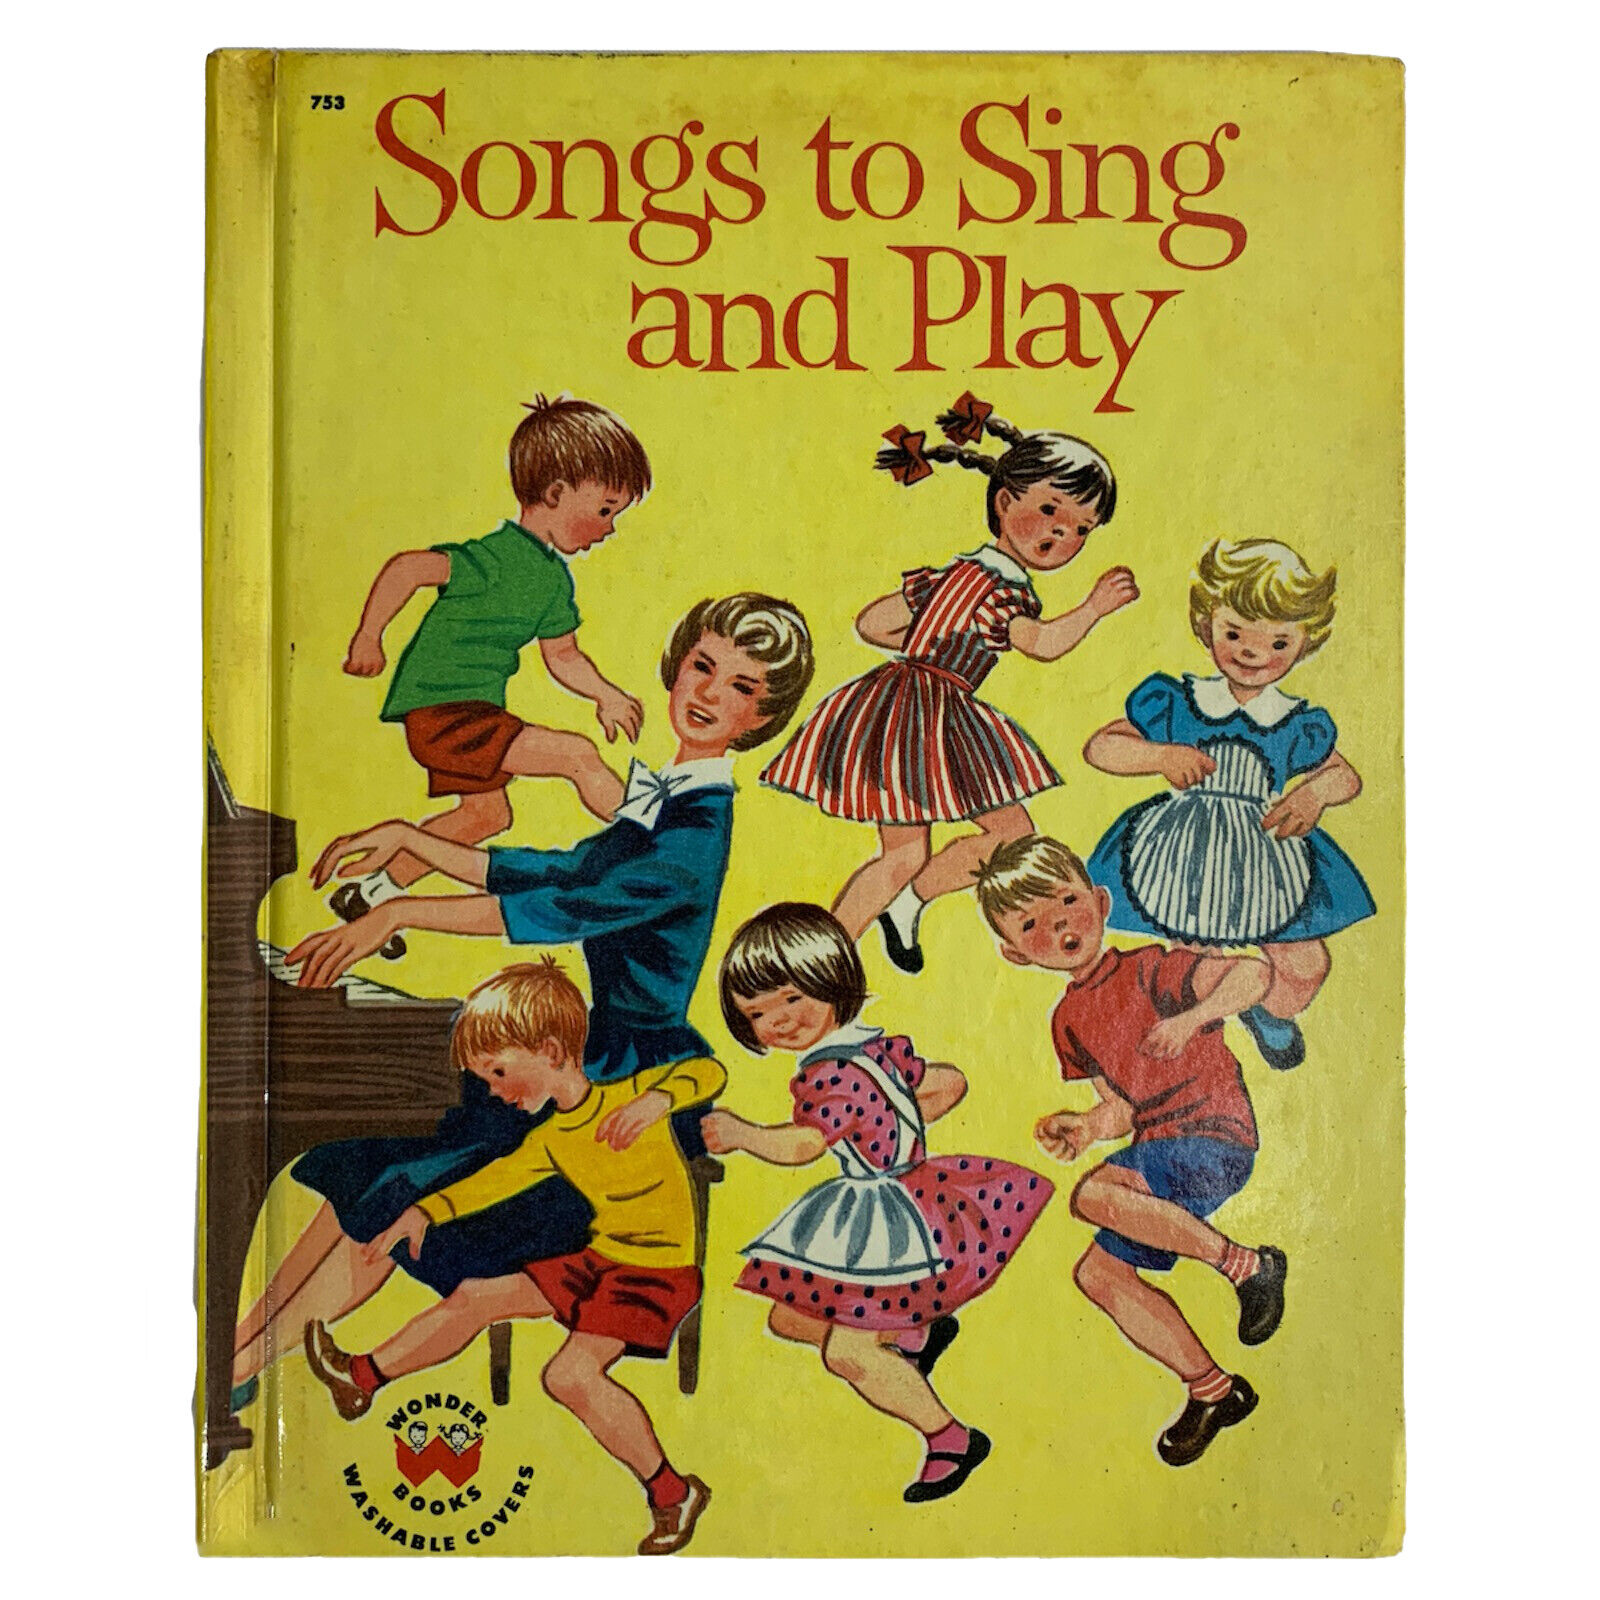 SONGS TO SING AND PLAY A WONDER BOOK #753 Vintage Oscar Weigle